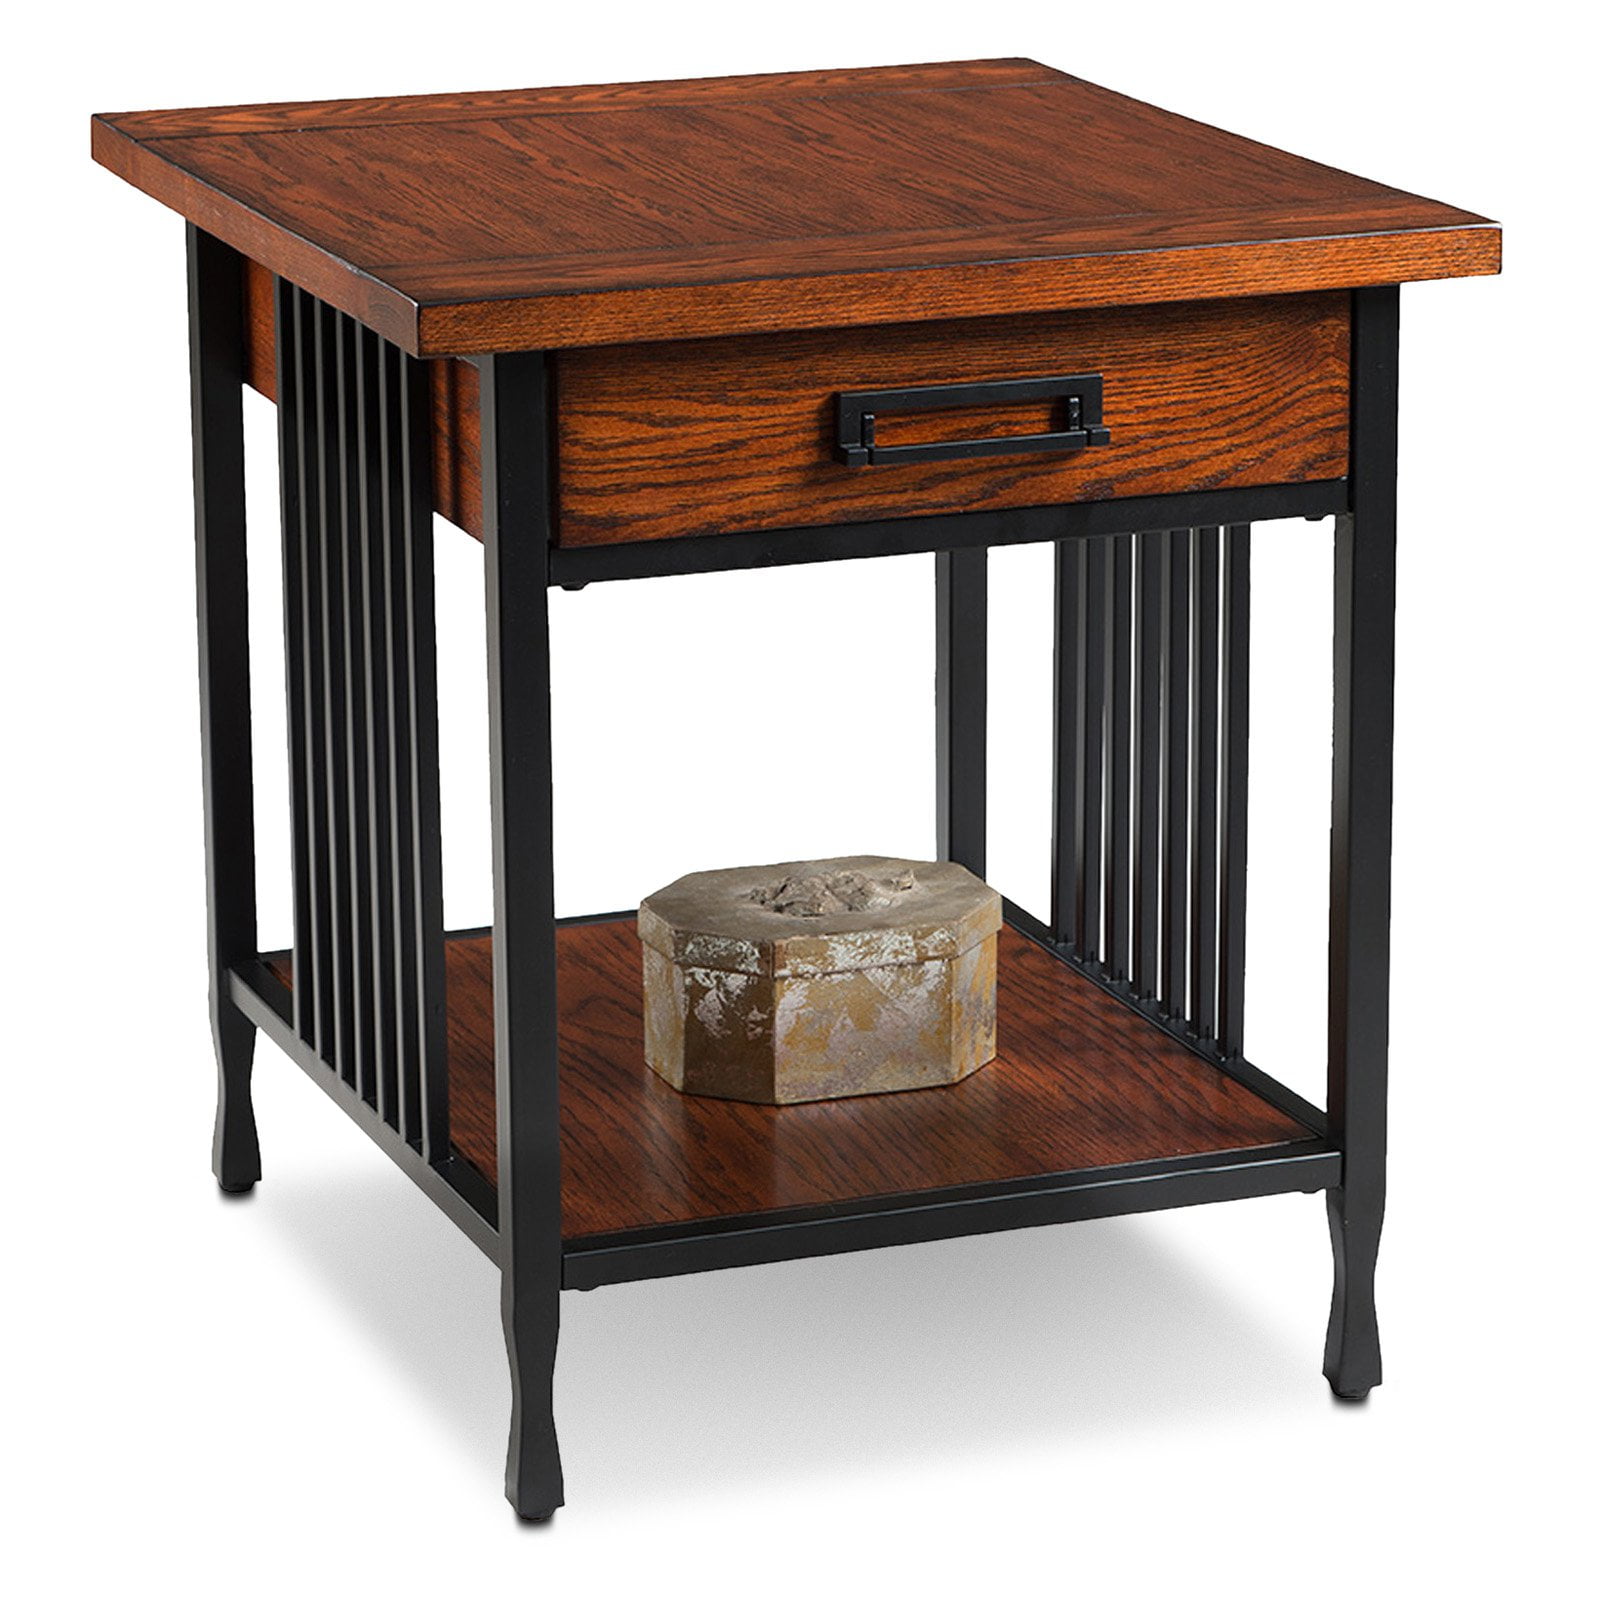 Leick Delton Storage Chair Side End Table with Drawer